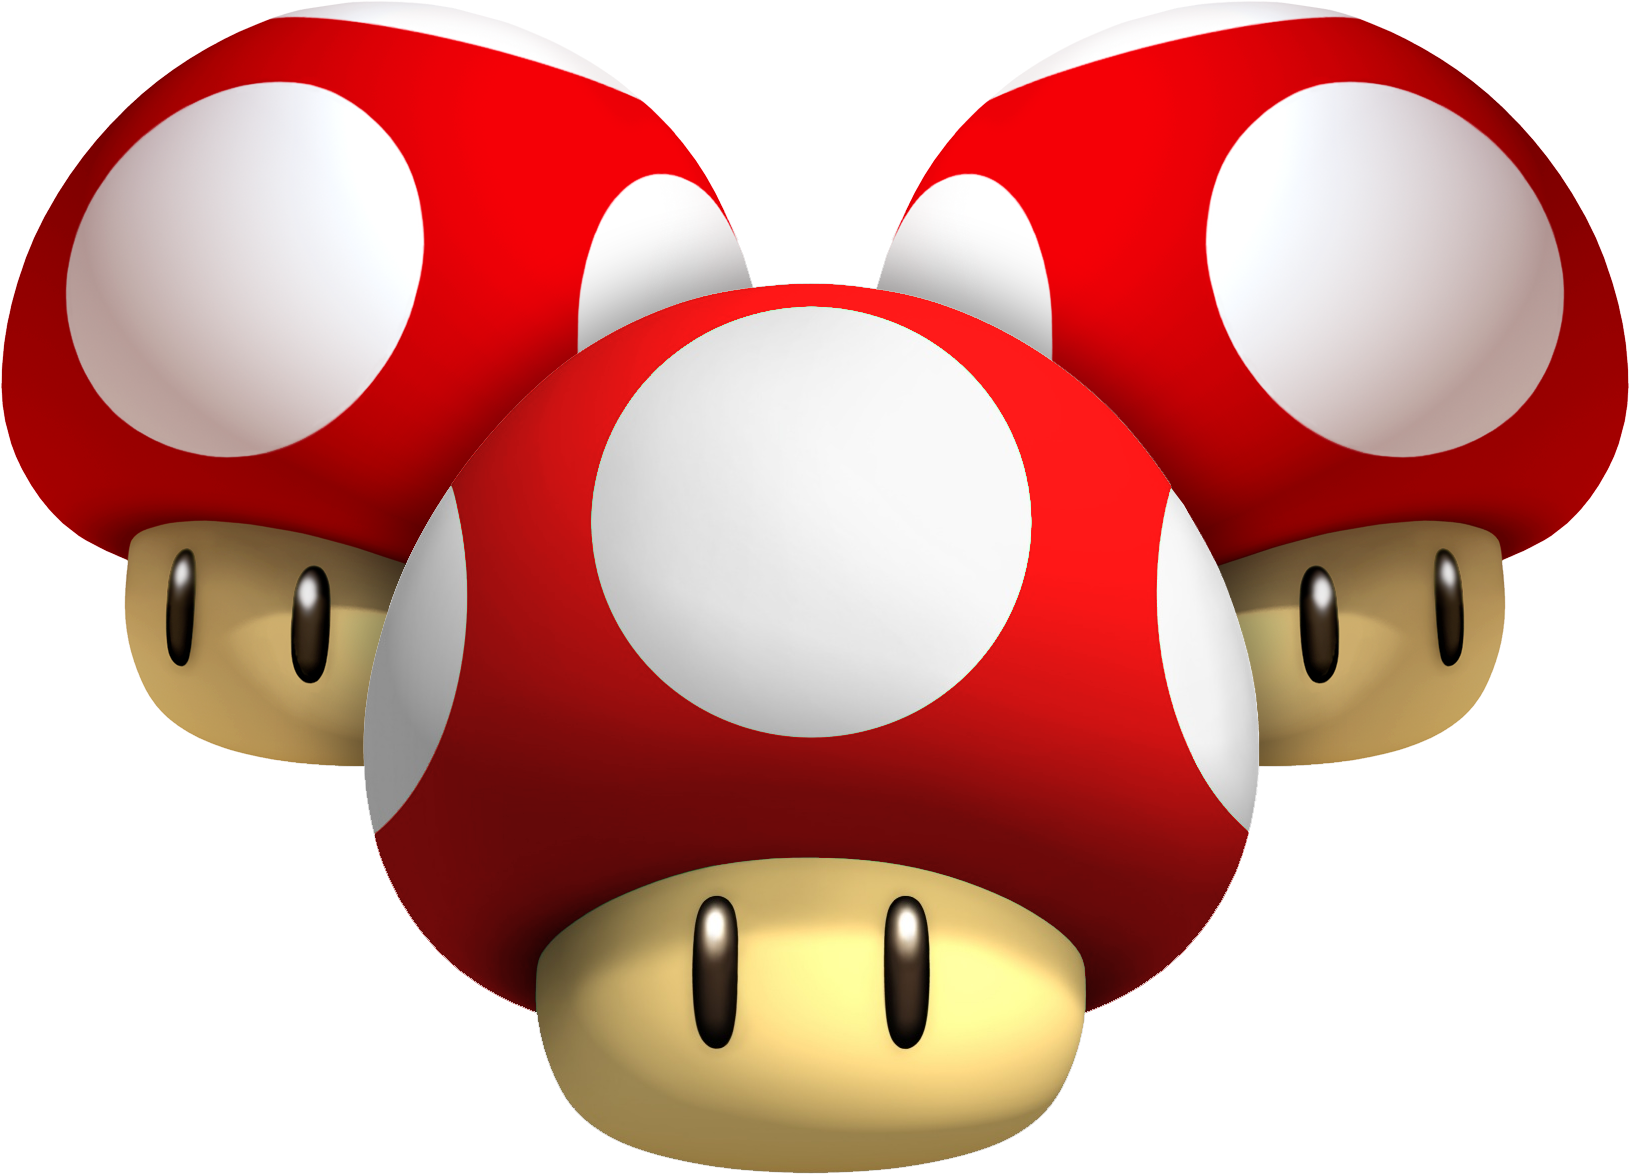 A Group Of Red And White Mushrooms PNG